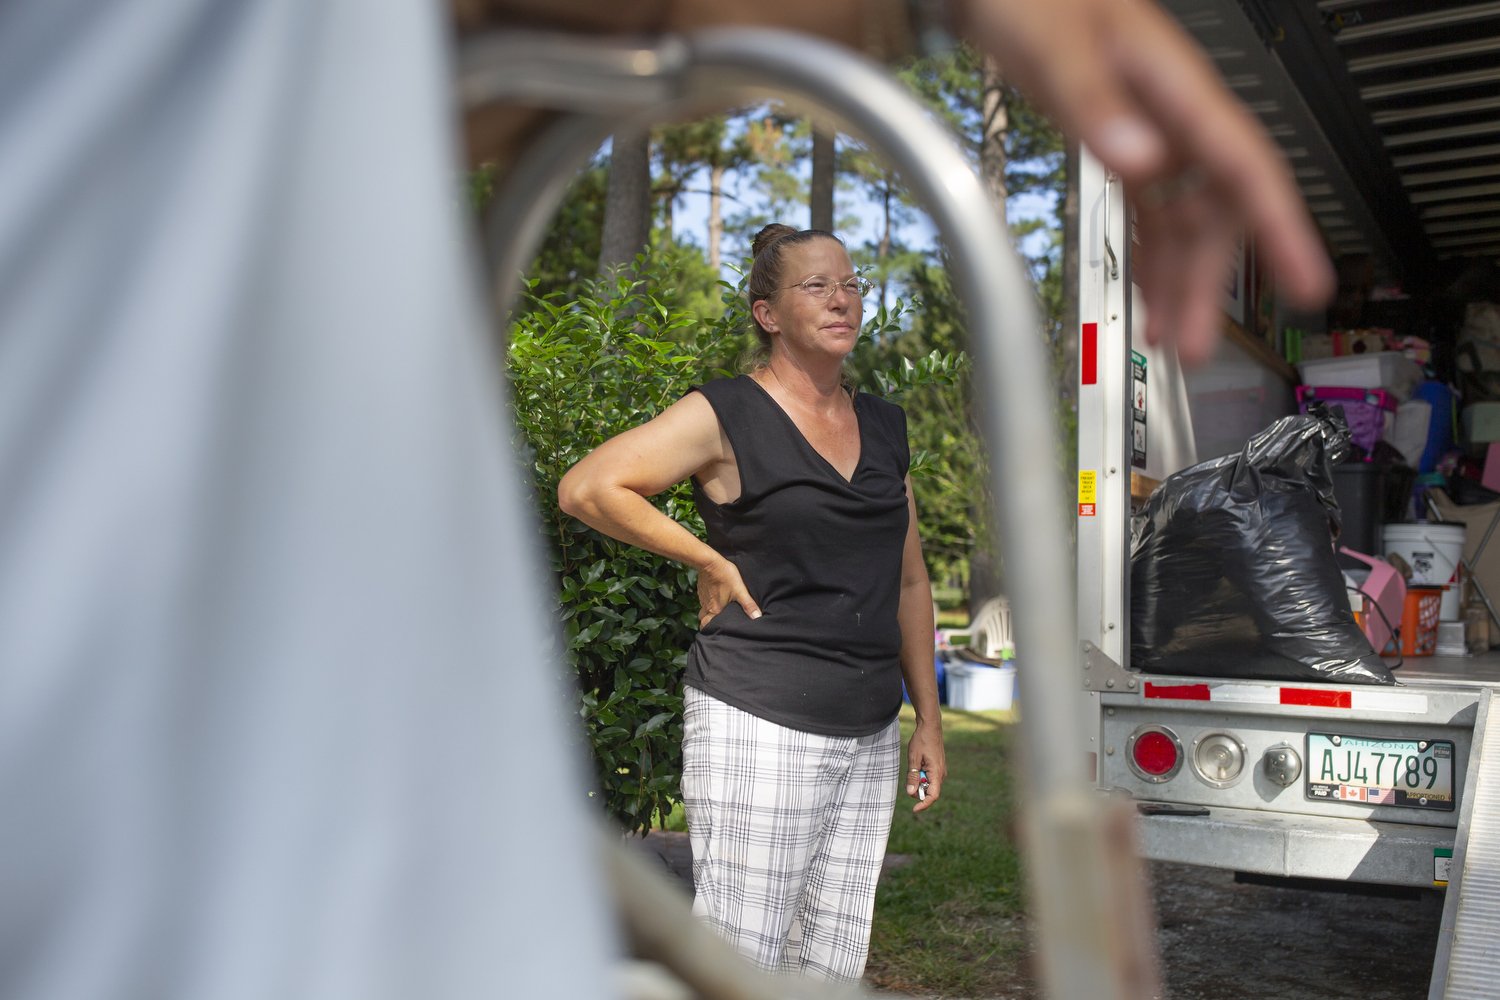  Terri Straka talks with her family as they help her move into her new home in Myrtle Beach, South Carolina. Straka is part of a buyout program to relocate Horry County residents away from flood prone areas and into safer homes.  For The Washington P